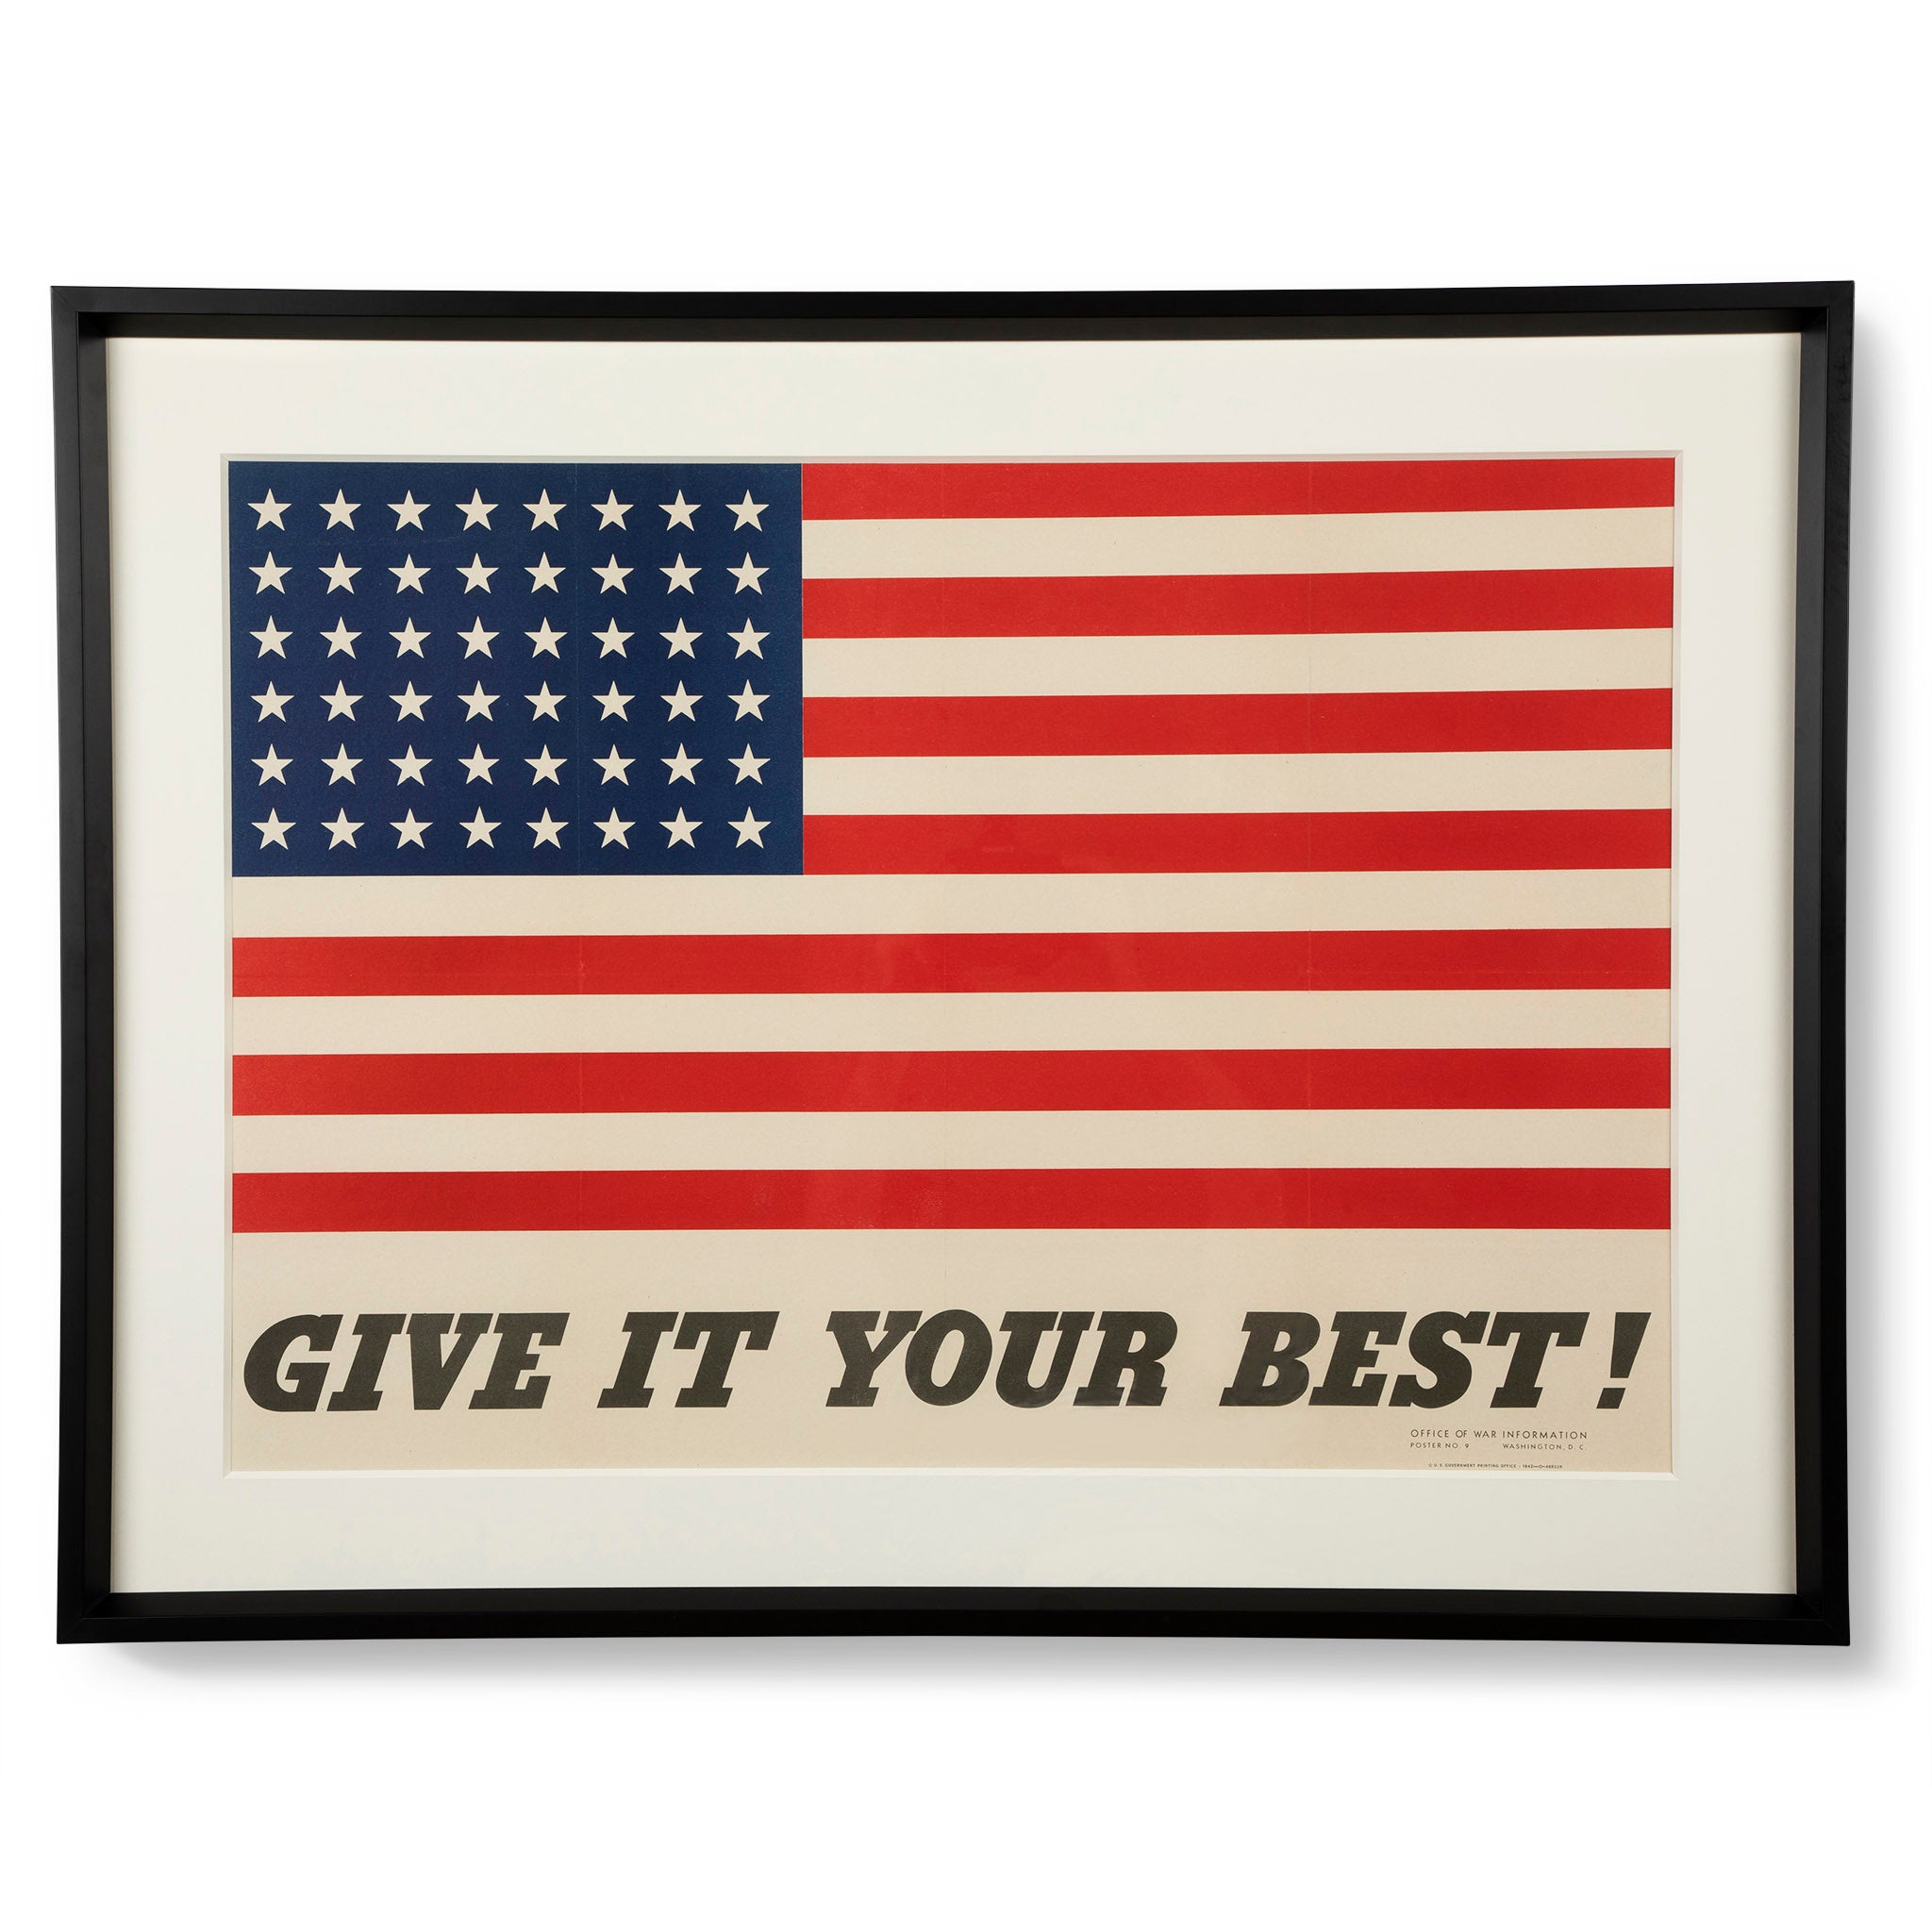 Original Give It Your Best! World War II American Flag Poster